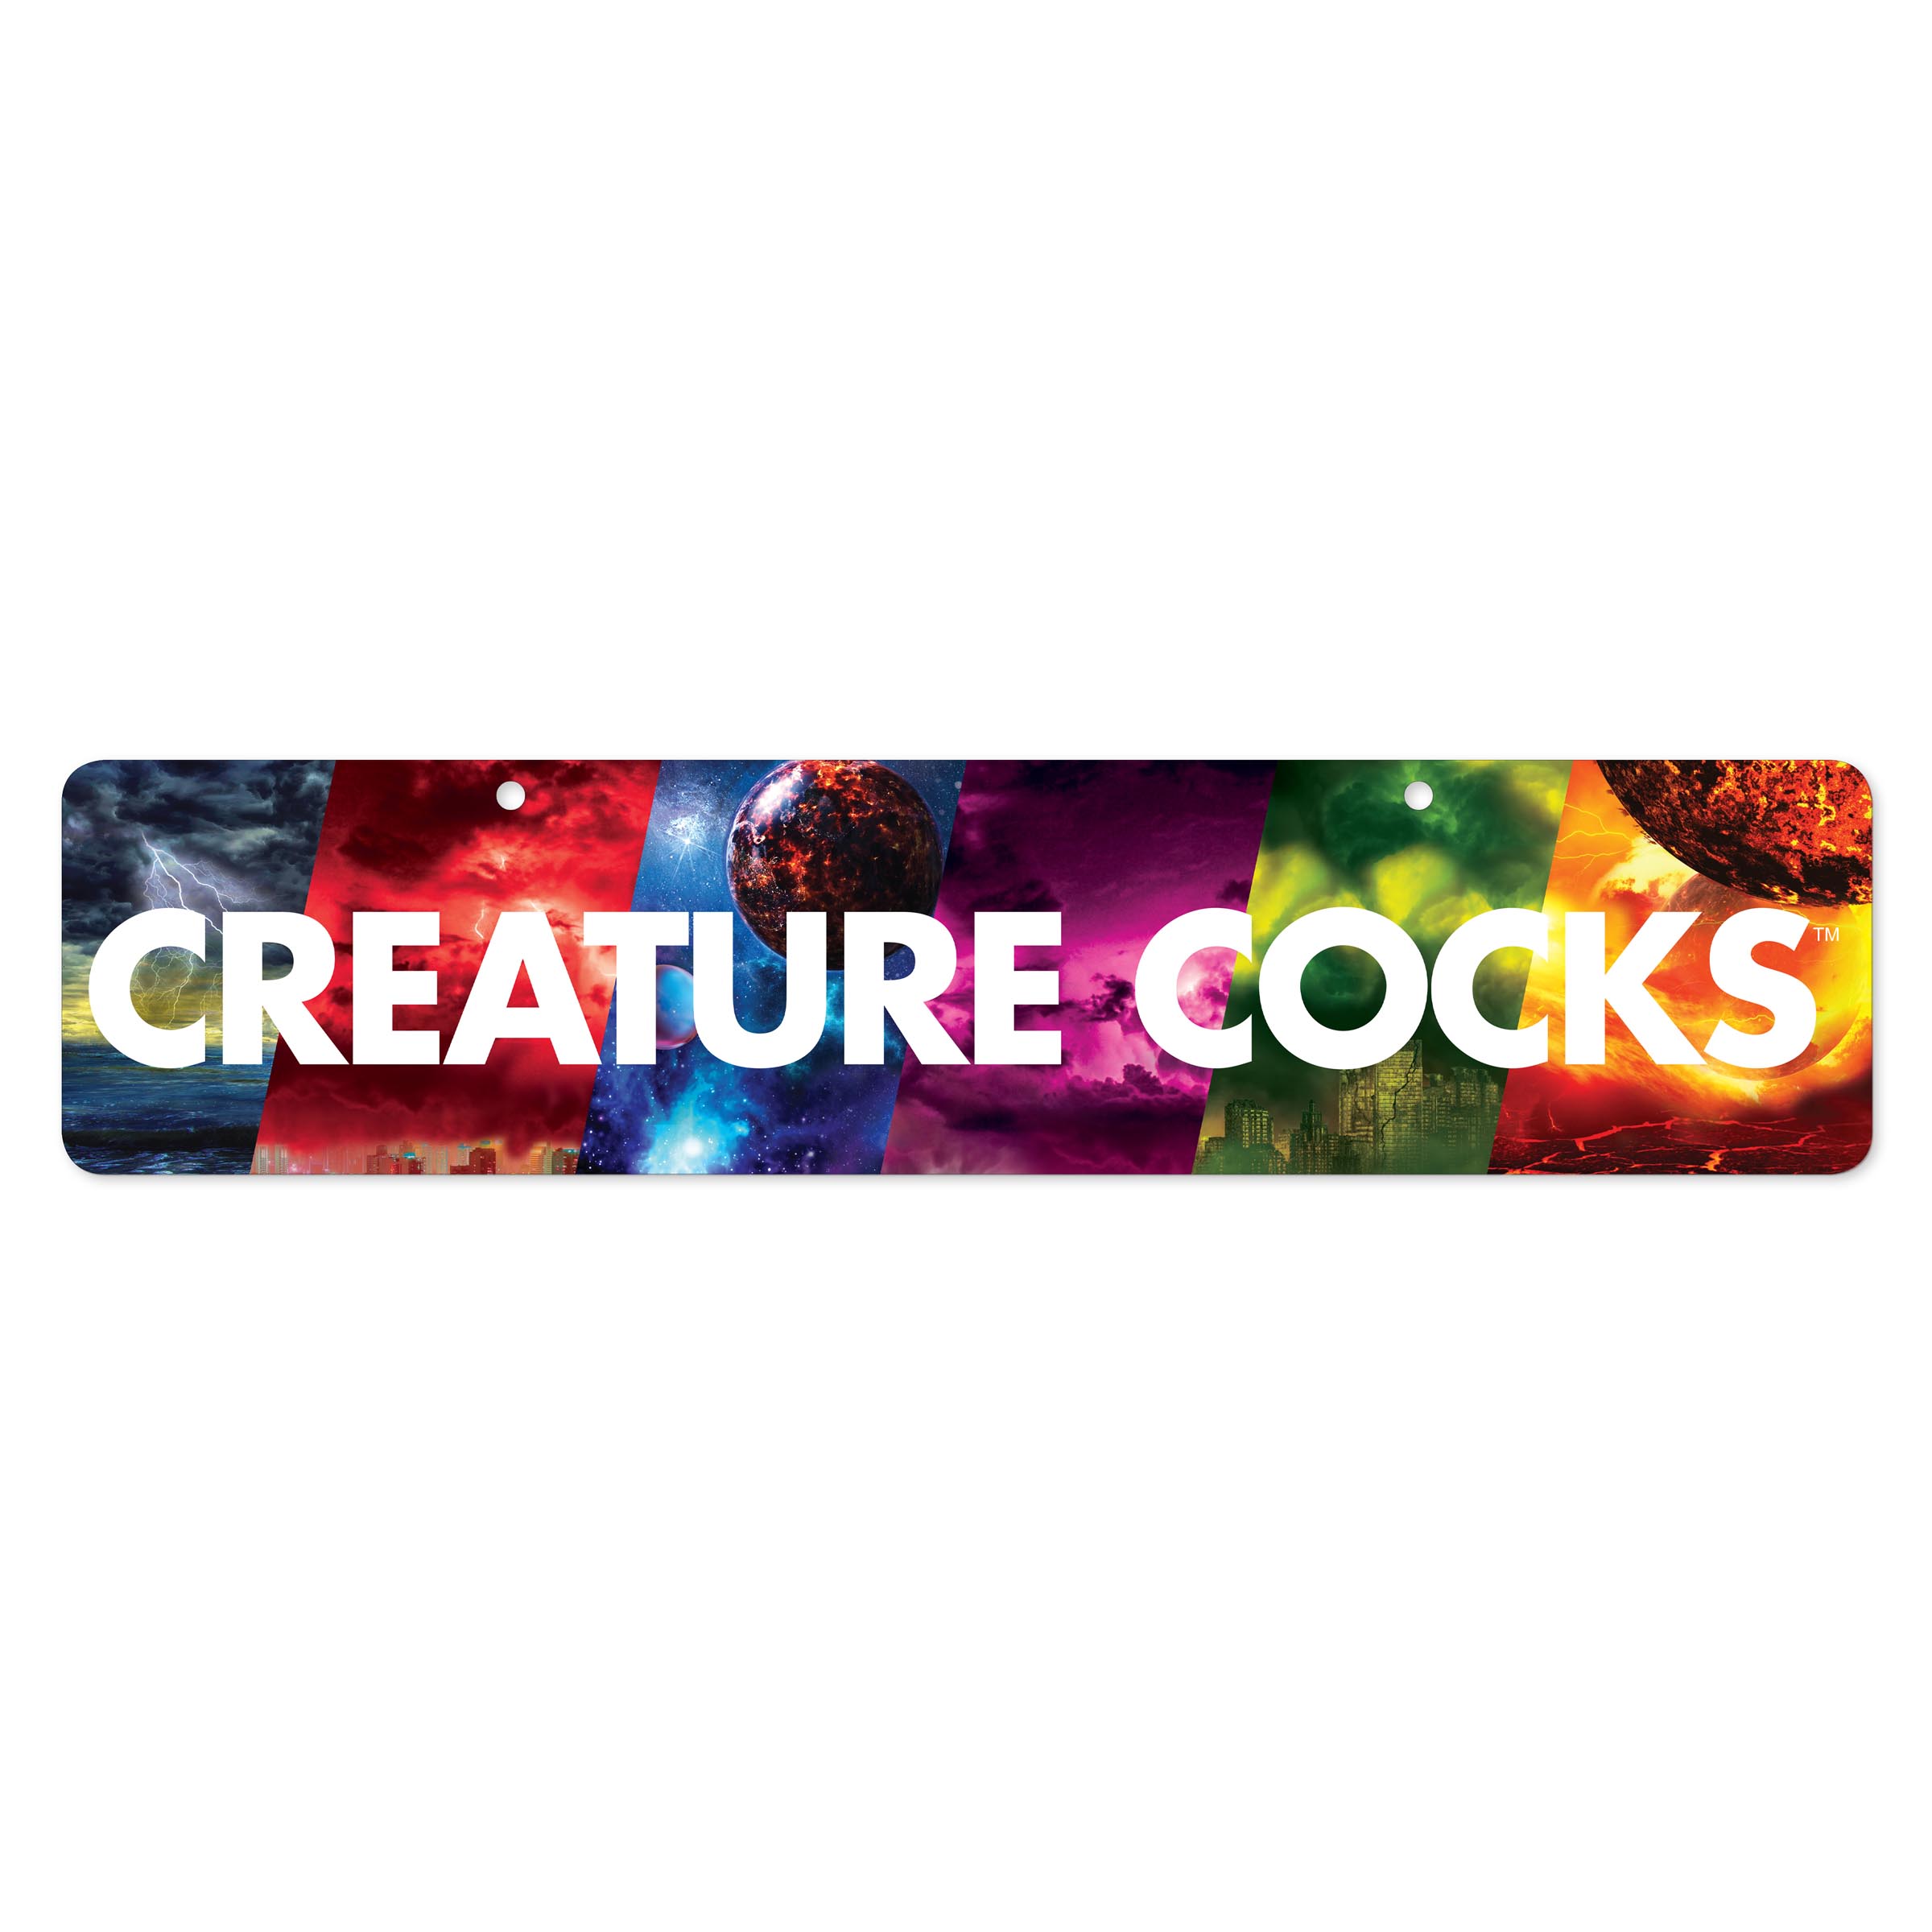 Cap off your Creature Cocks display with an attractive and functional planogram banner. Printed on heavy cardstock